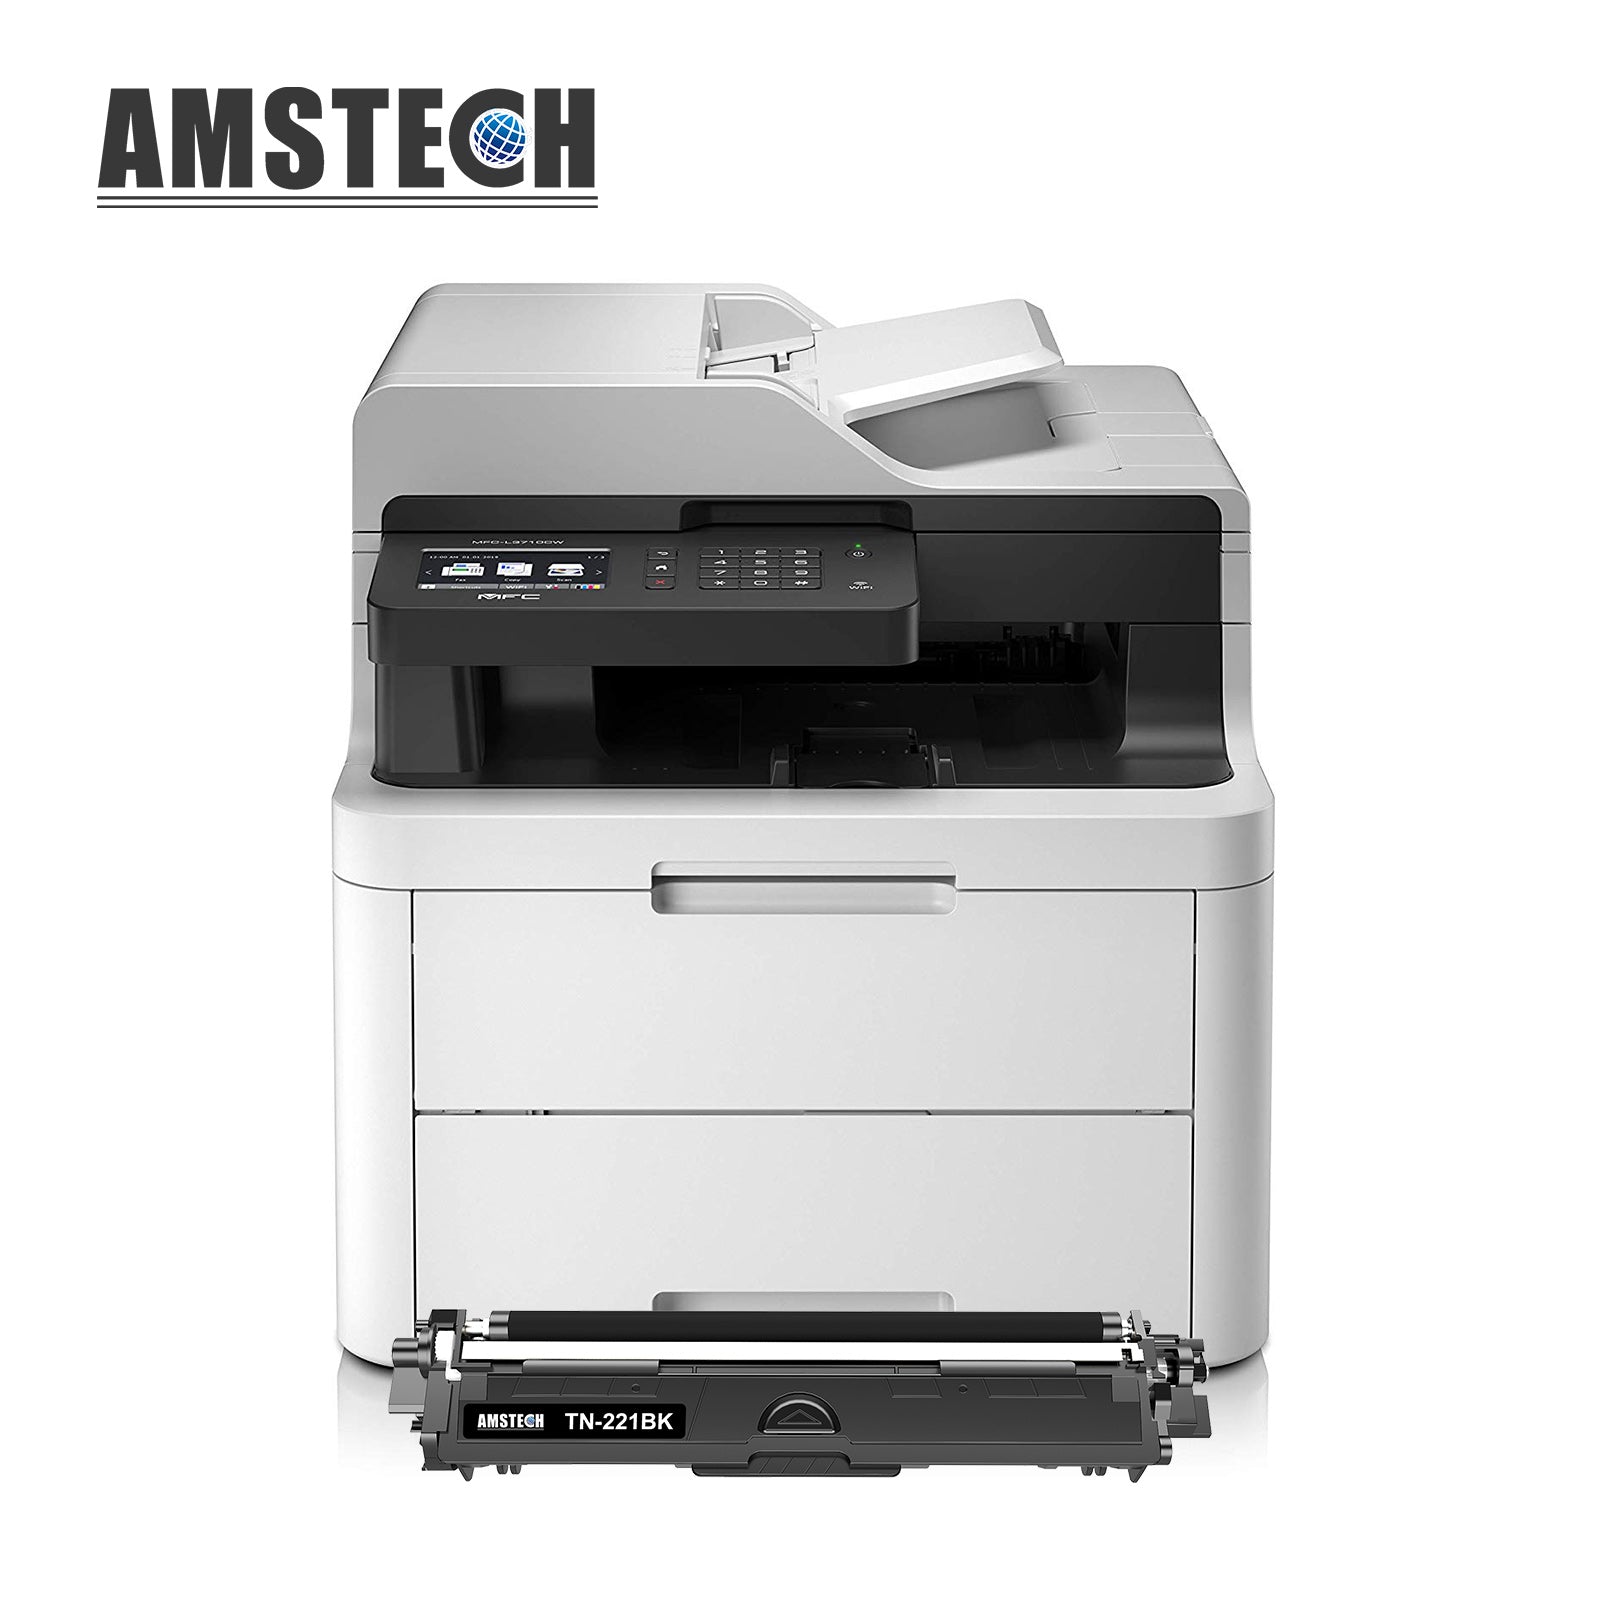 Amstech 4-Pack Compatible Toner for Brother TN-221BK TN-225C TN-225M TN-225Y TN-225 TN-221 HL-3140CW 3142CW 3150CDW 3152CDW 3170CDW 3172CDW MFC-9130CW 9140CDN 9330CDW 9340CDW DCP-9020CDW Printer